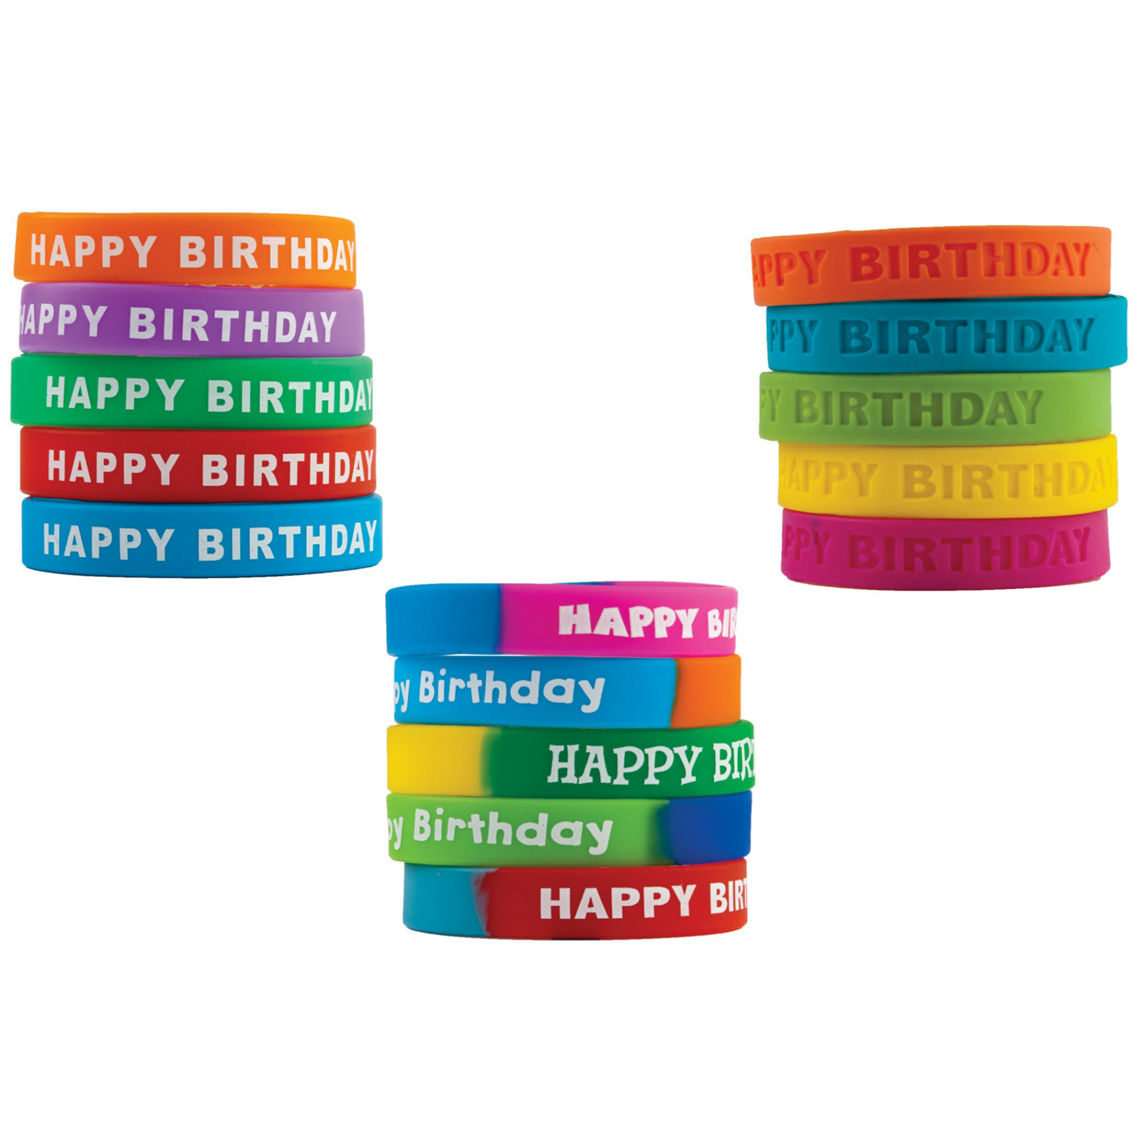 Teacher Created Resources® Happy Birthday Wristband Classroom Super Pack - Image 2 of 5